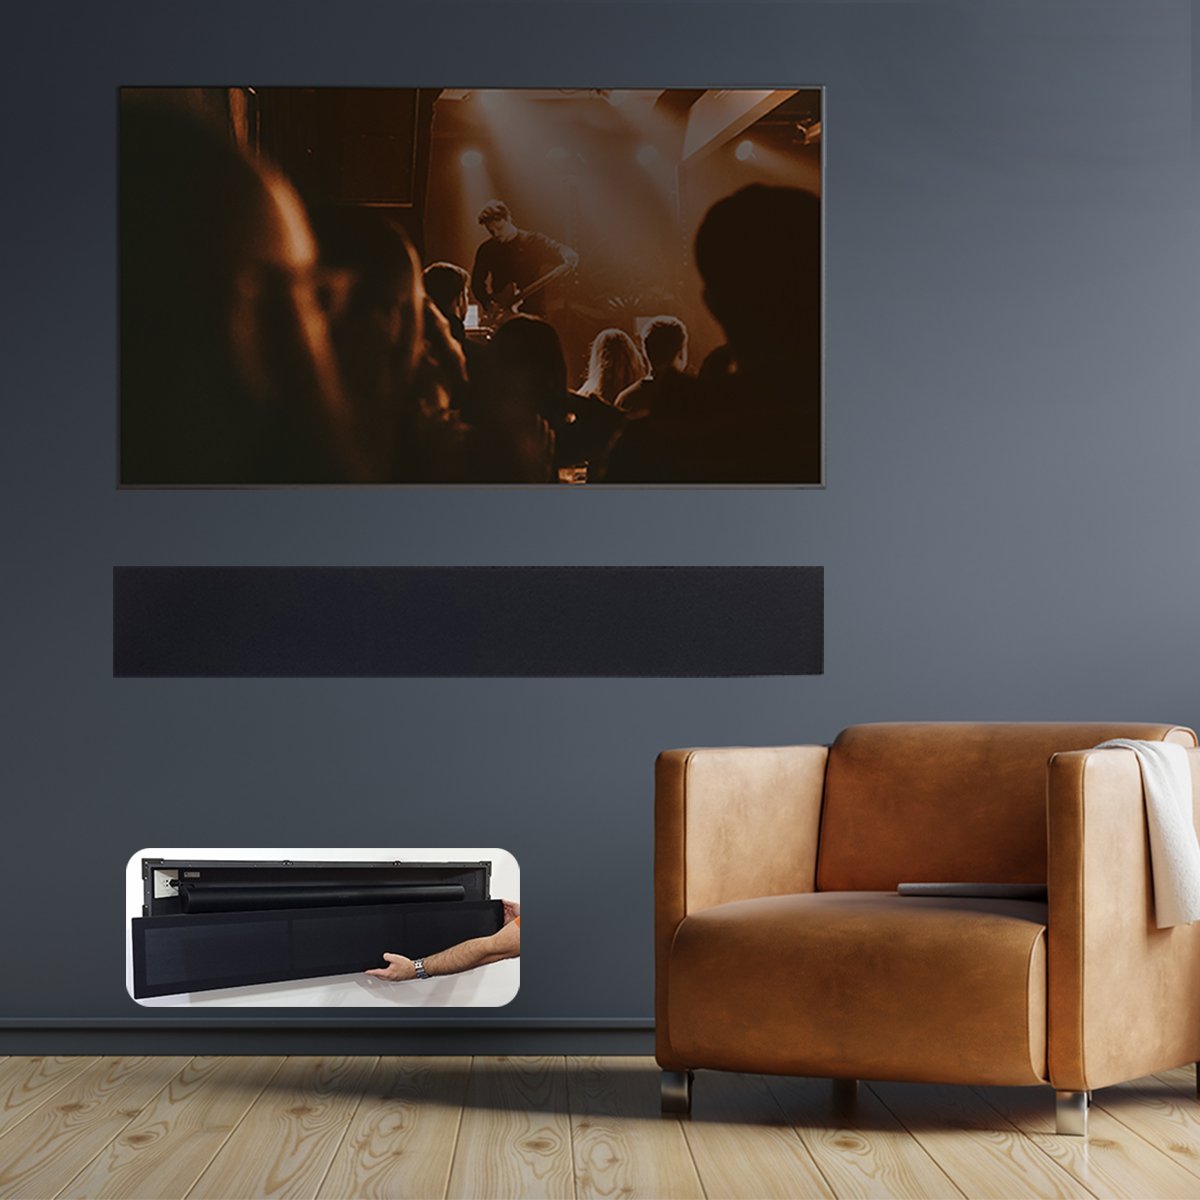 Wall-Mount Sonos living-roomwall_300dpi